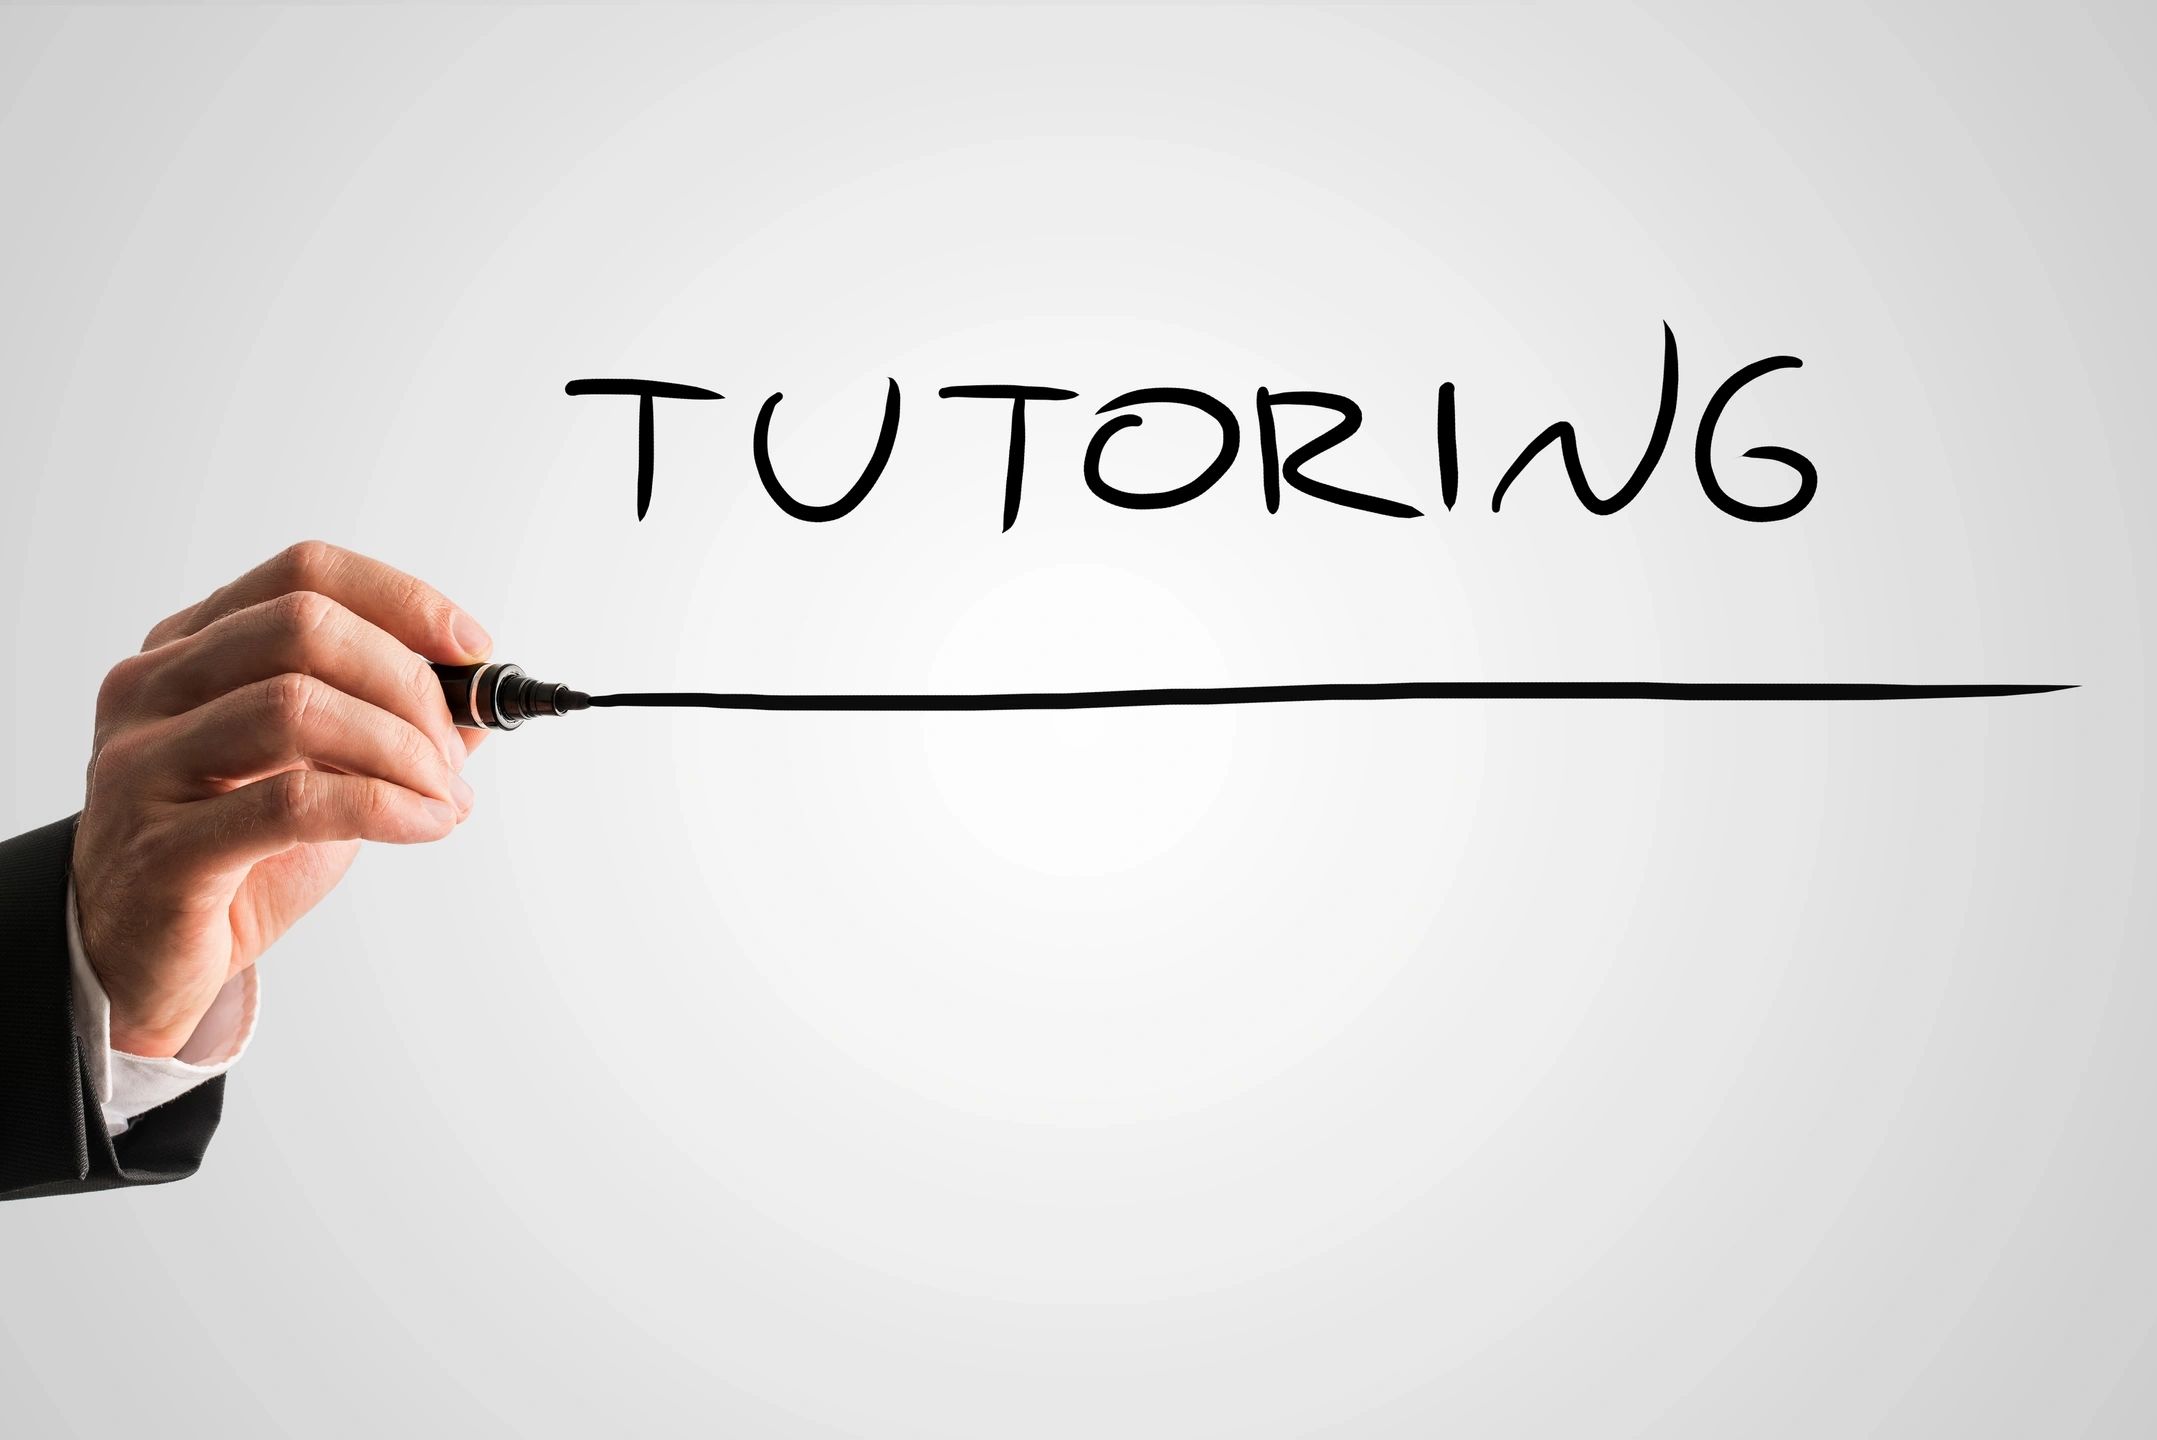 Avail Home tutors KG - 12th all subj'ts, Experienced & Qualified -  Education & Classes - 1763597551